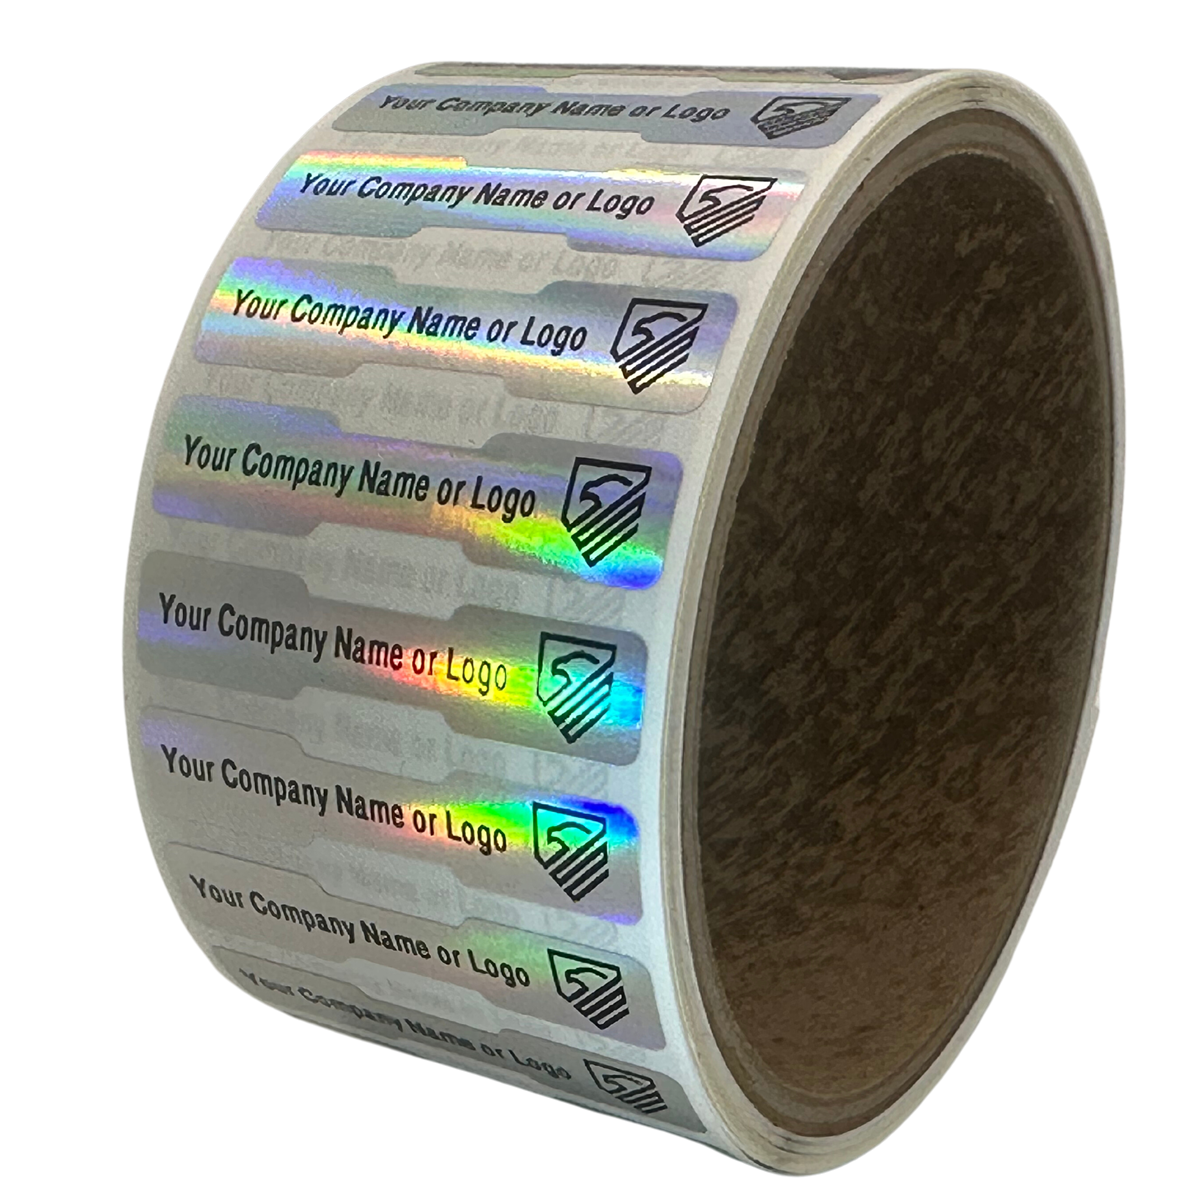 500 Non Residue Holographic Rainbow Finish Tamper-Evident Stickers TamperGuard® Security Label Seal, Dogbone Shape Size 1.75" x 0.375 (44mm x 9mm) >Click on item details to customize.